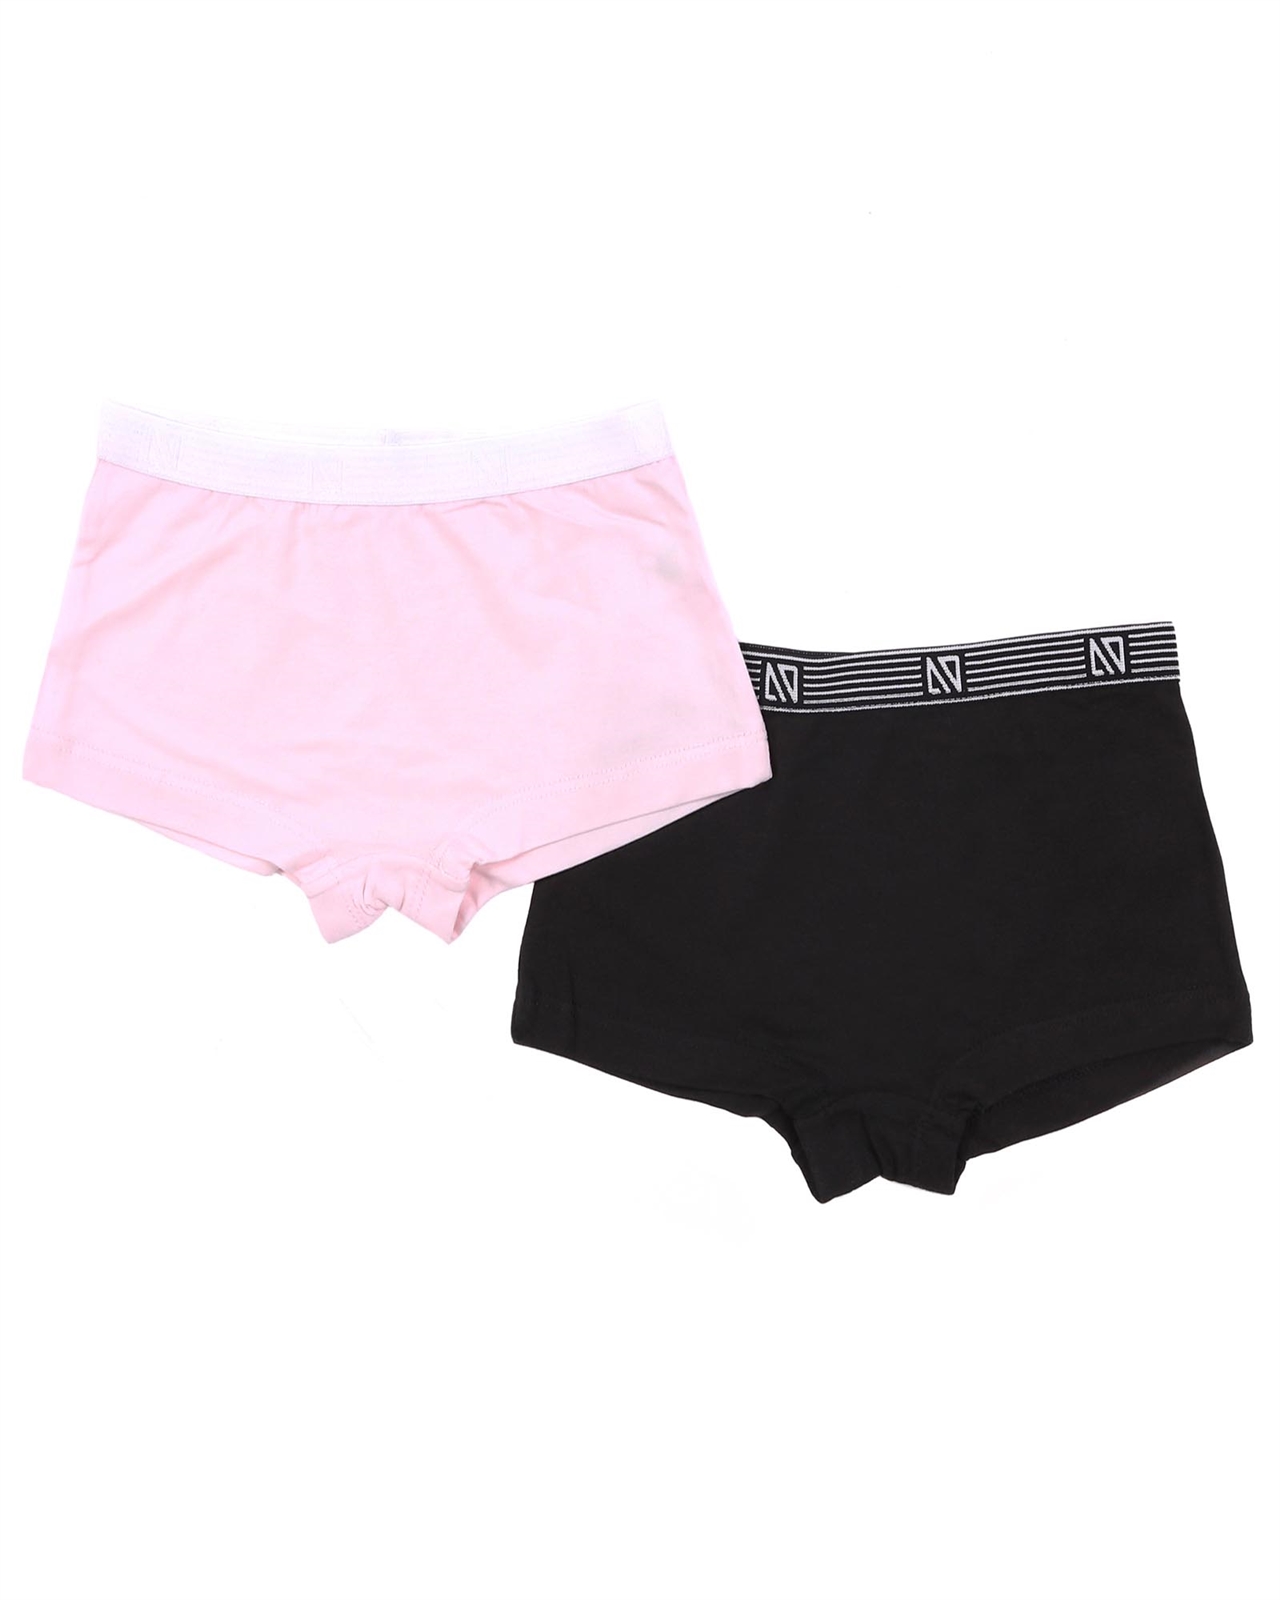 Girls Black & White Cotton Knickers (2 Pack)